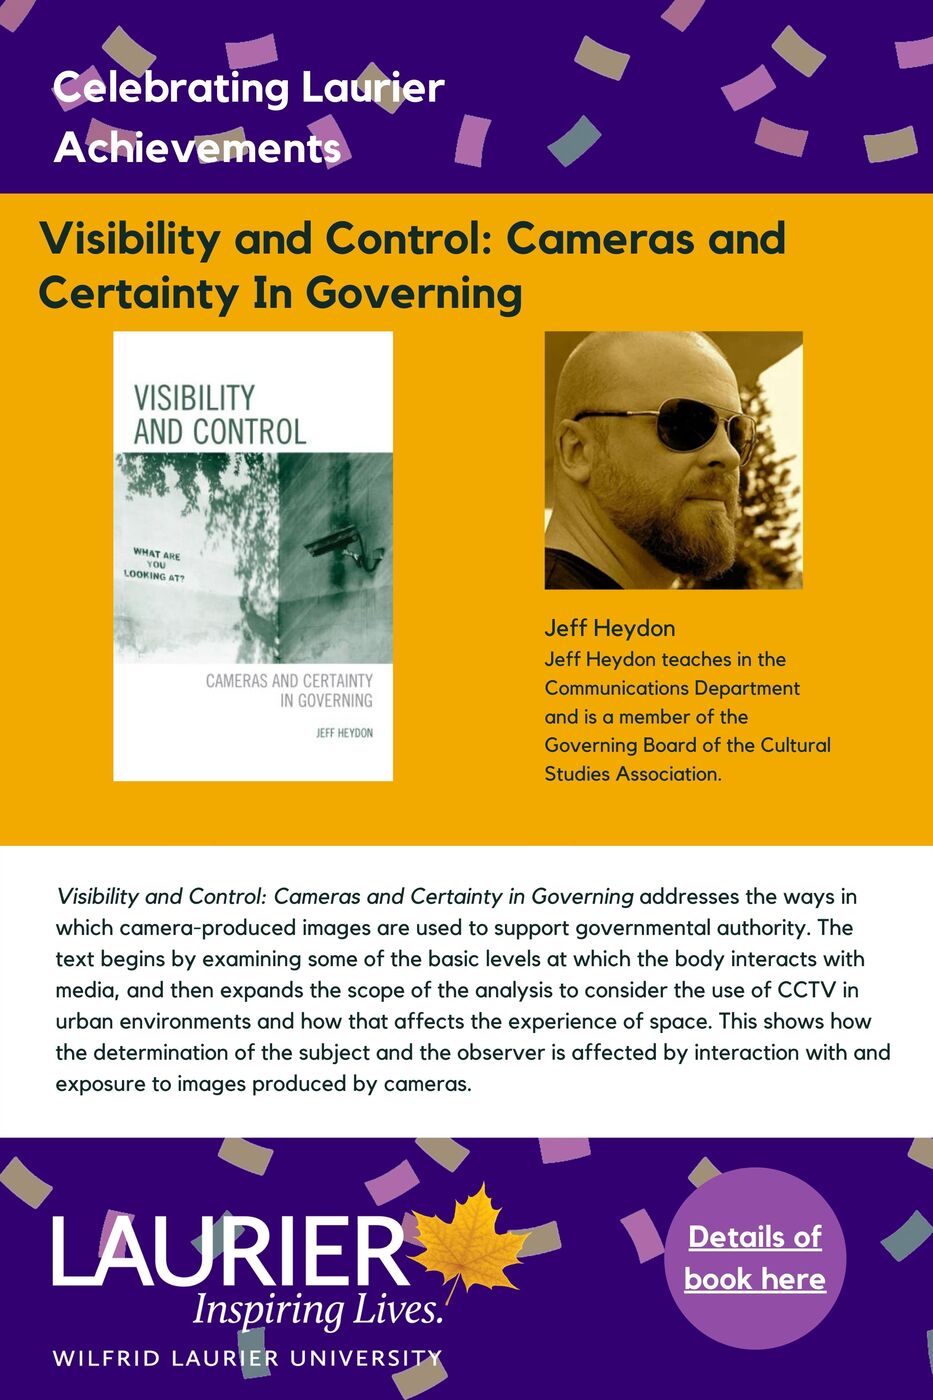 Visibility and Control: Cameras and Certainty In Governing promtional poster for the Celebrating Laurier Achievements program with a headshot of the book's author, Jeff Heydon.